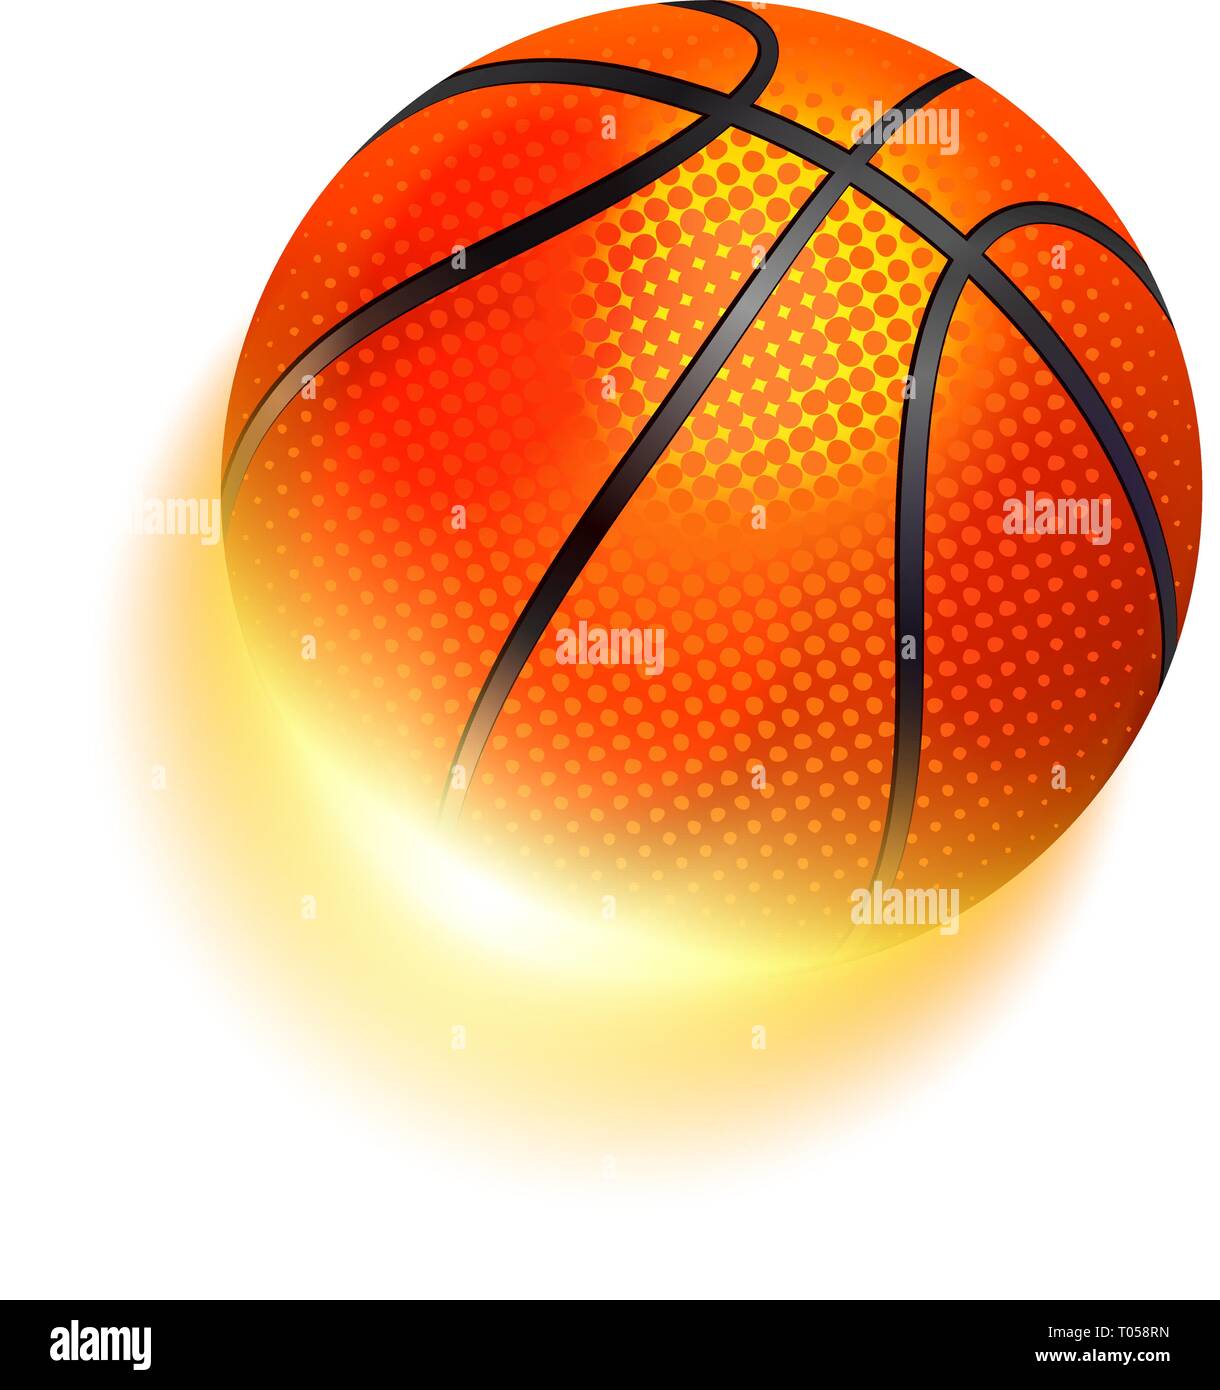 Basketball sport ball in fire. Bright and shiny effects with transparencies. Stock Vector